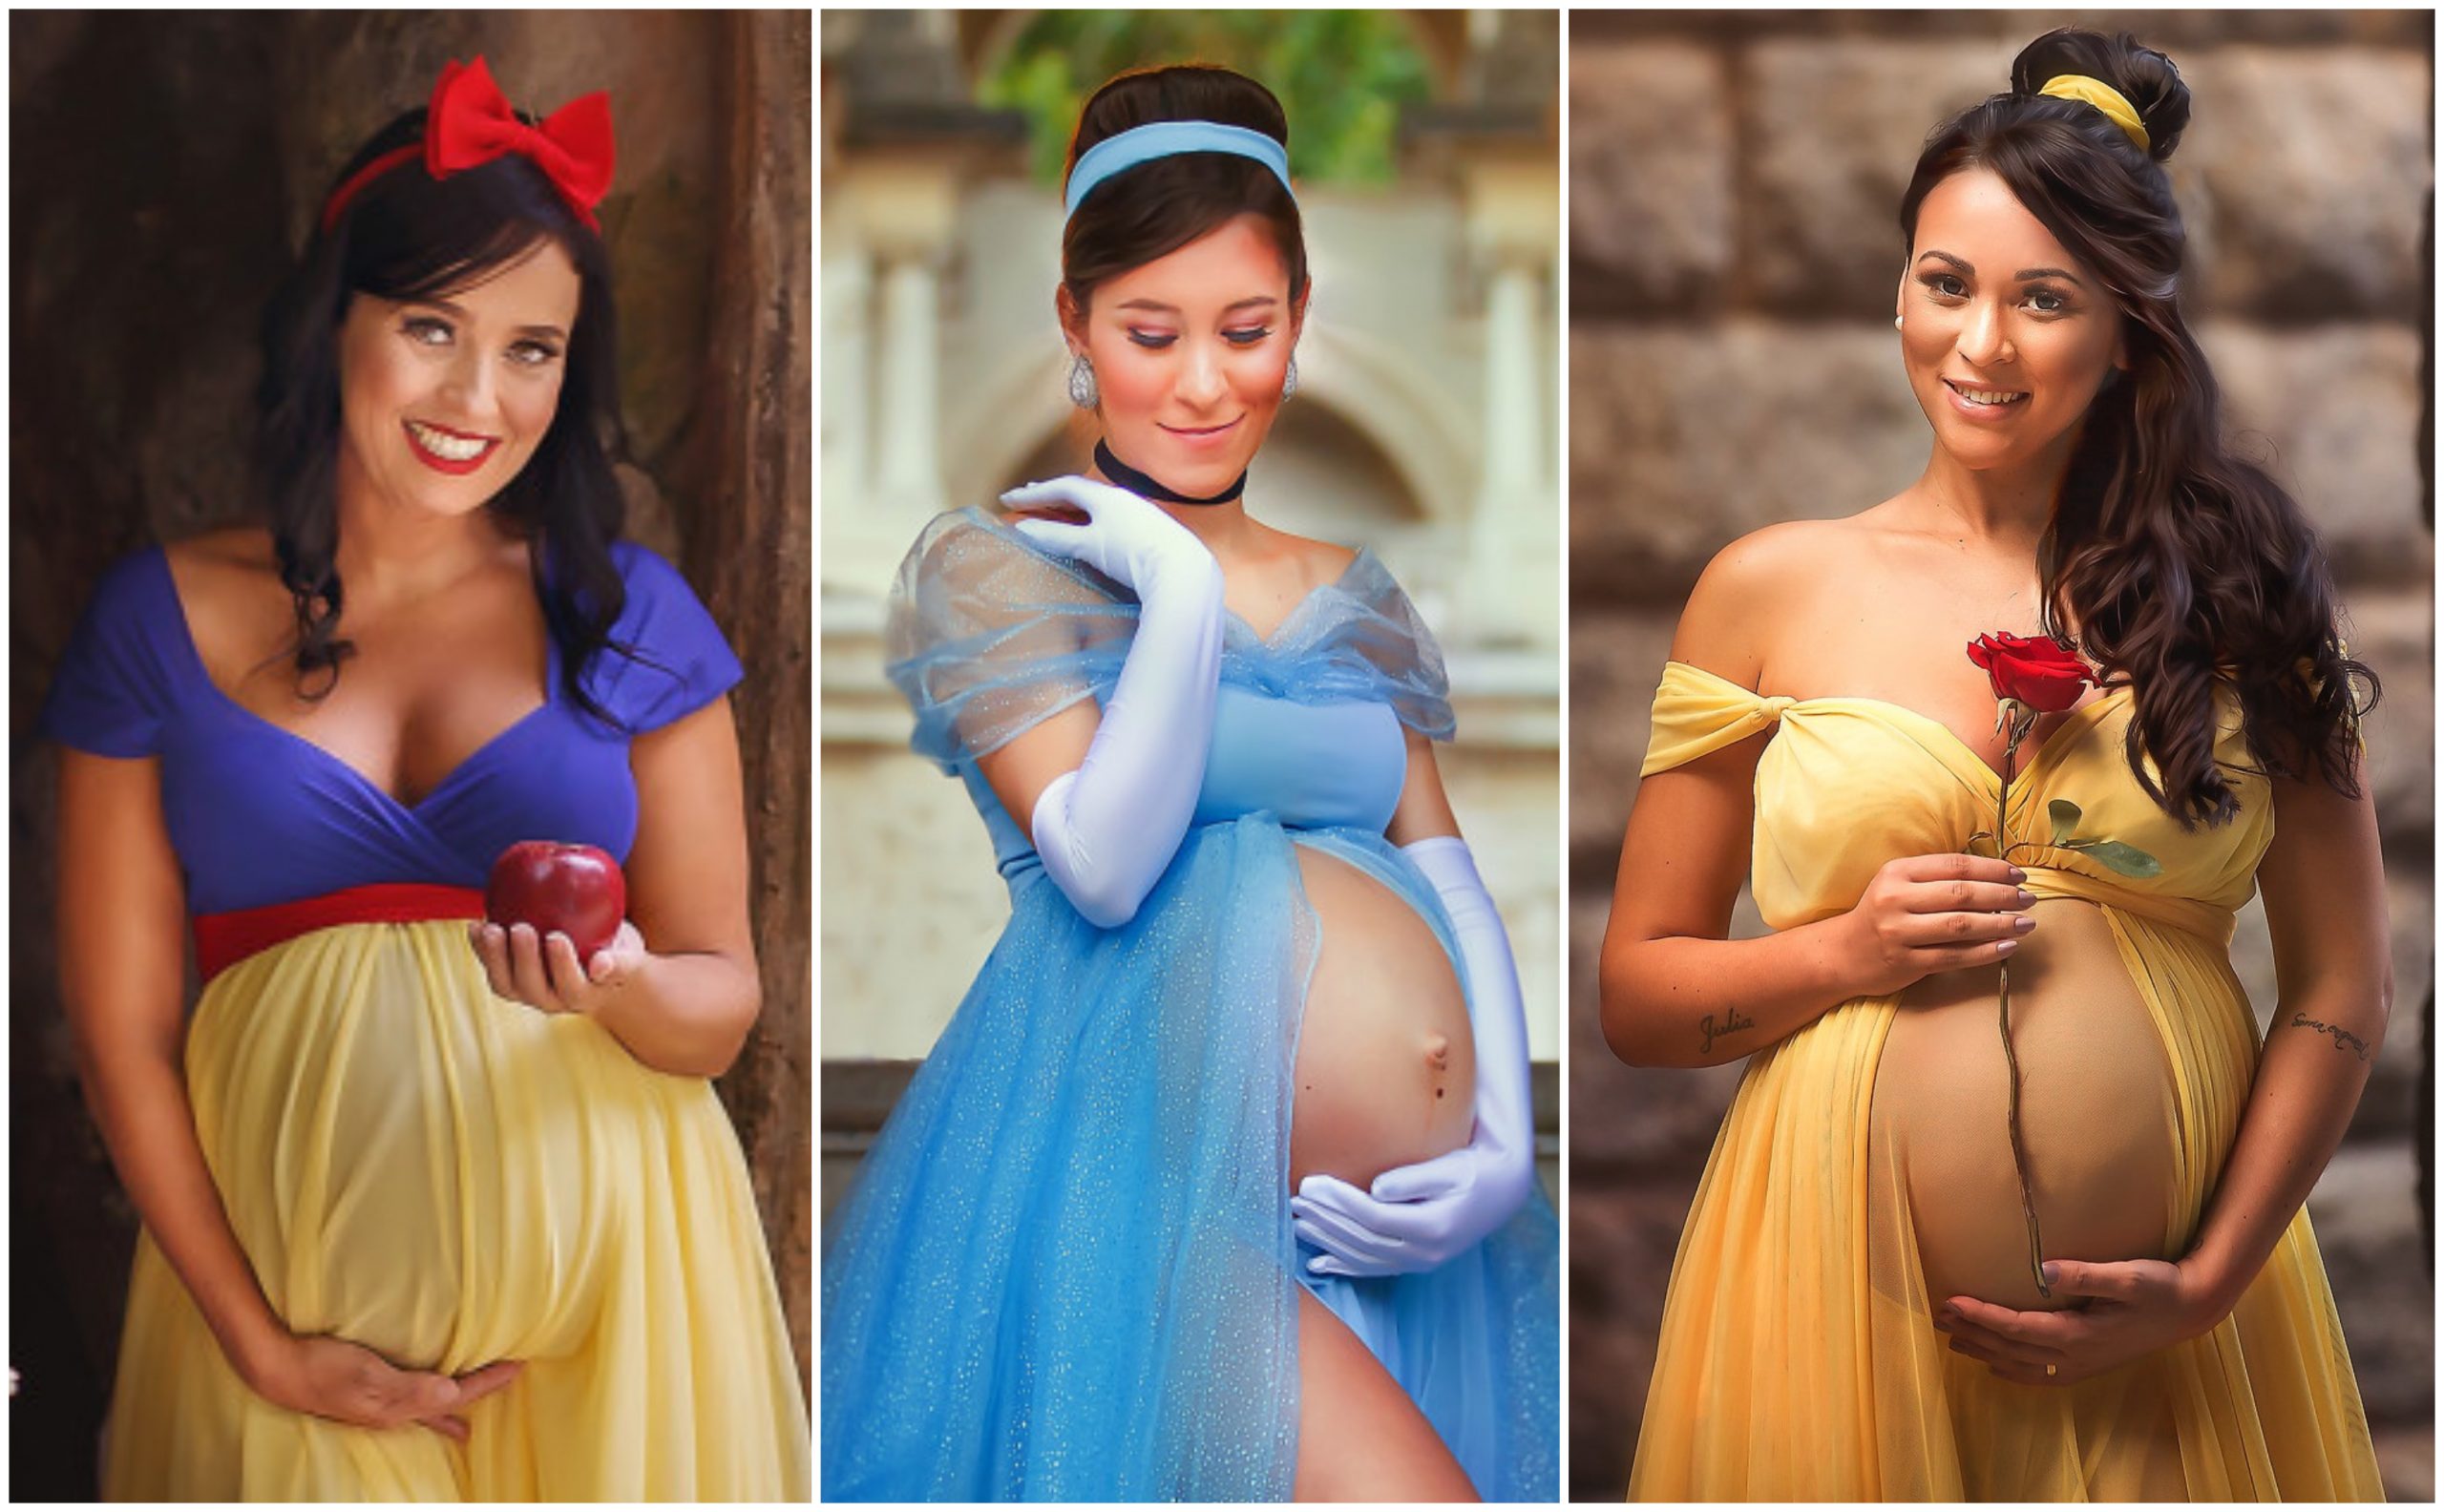 Magical Maternity Photo Shoots Turned These Expectant Moms Into Disney Princesses